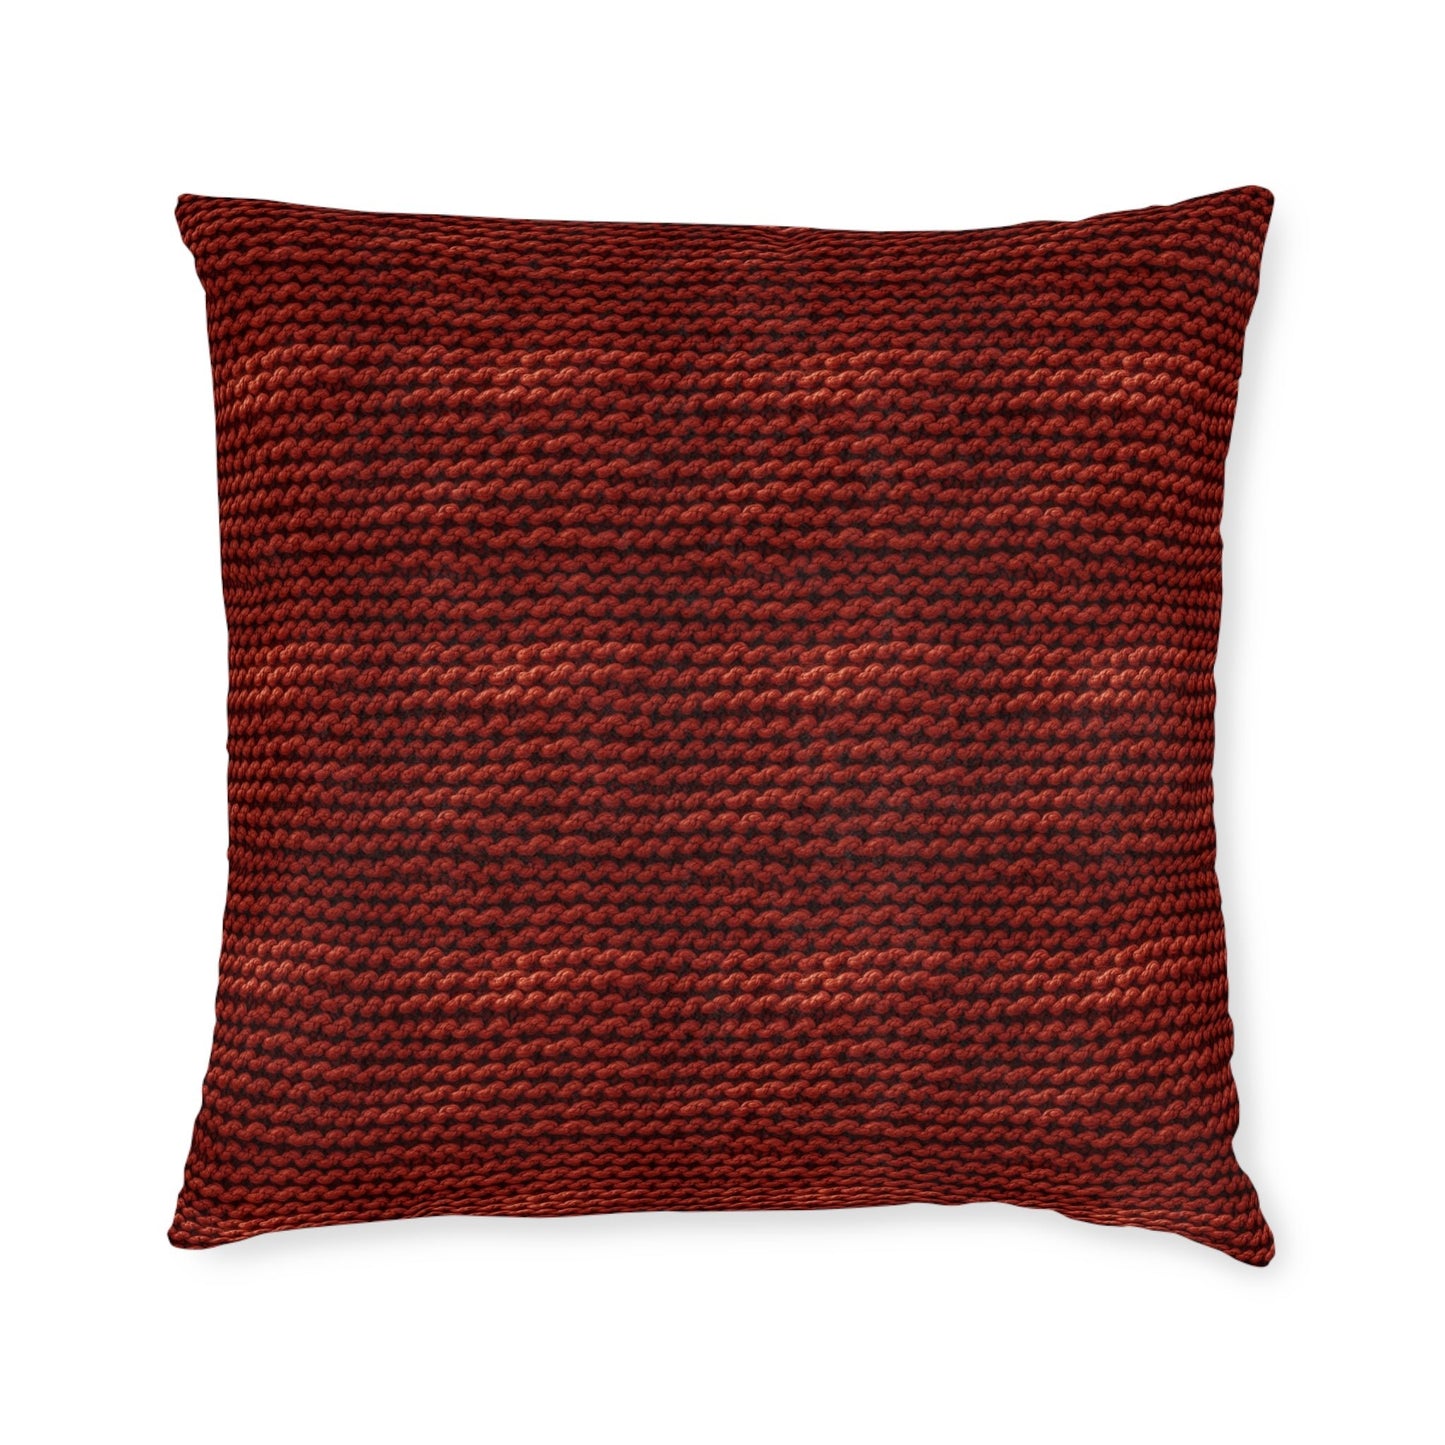 Autumn Yarn Chronicles: Warmth and Tradition - Square Pillow - Pattern Symphony